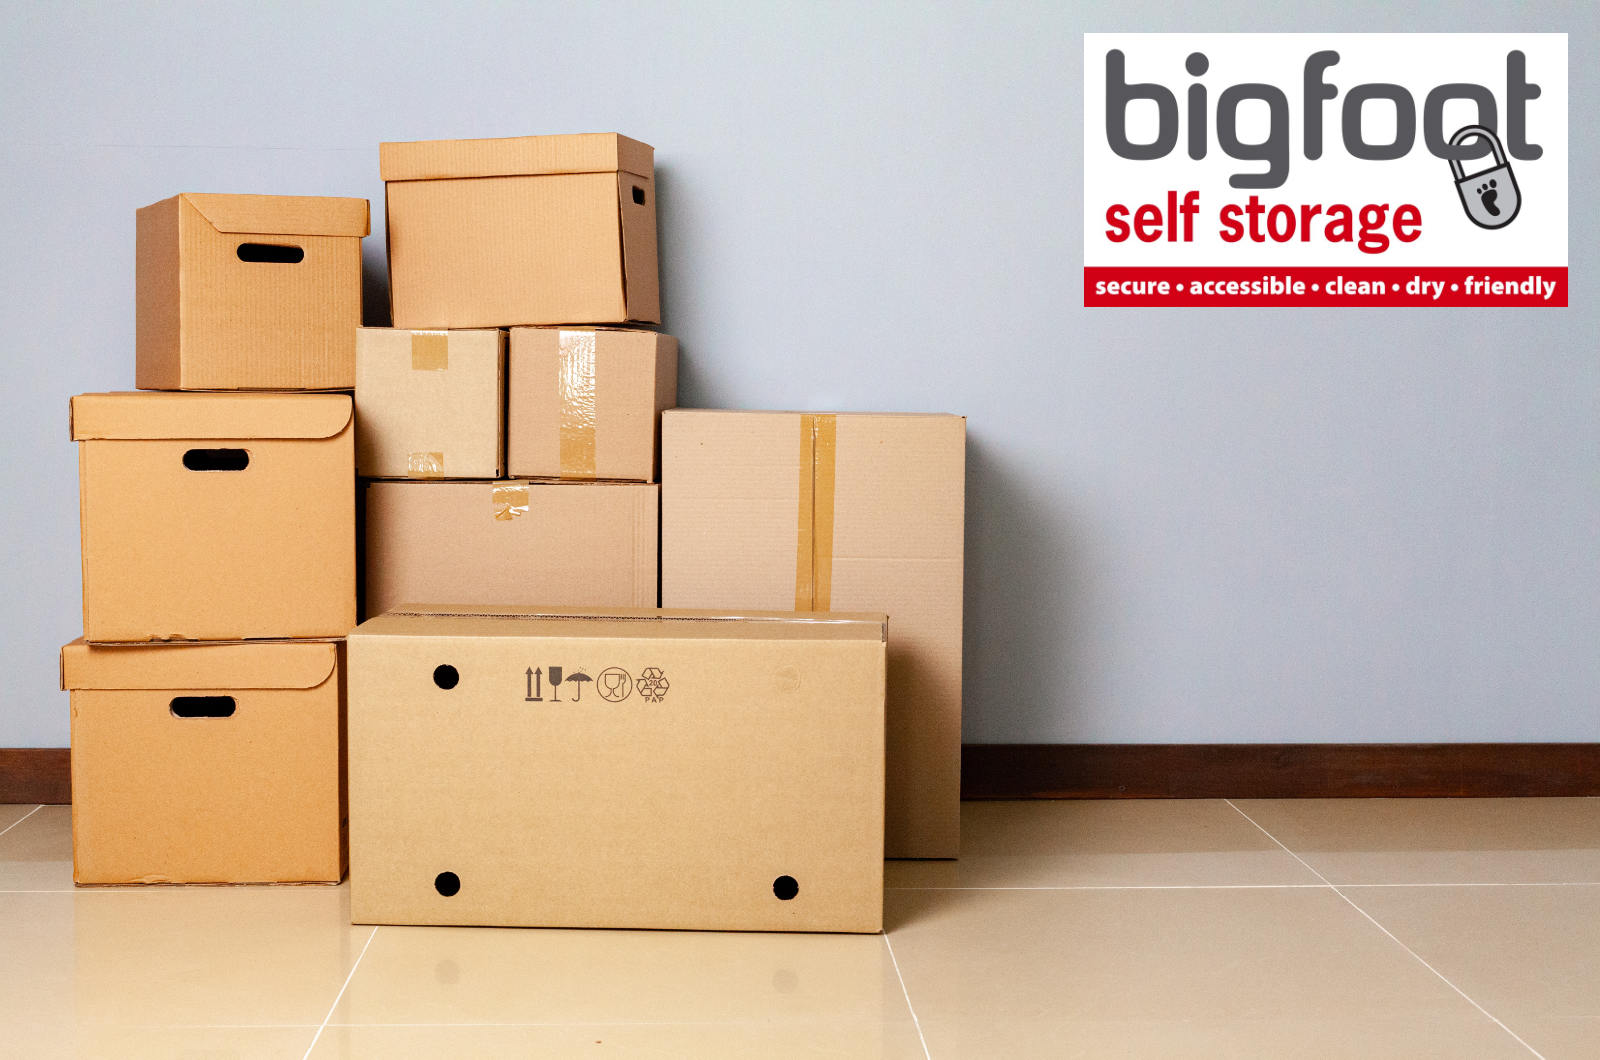 Benefits of self storage for businesses